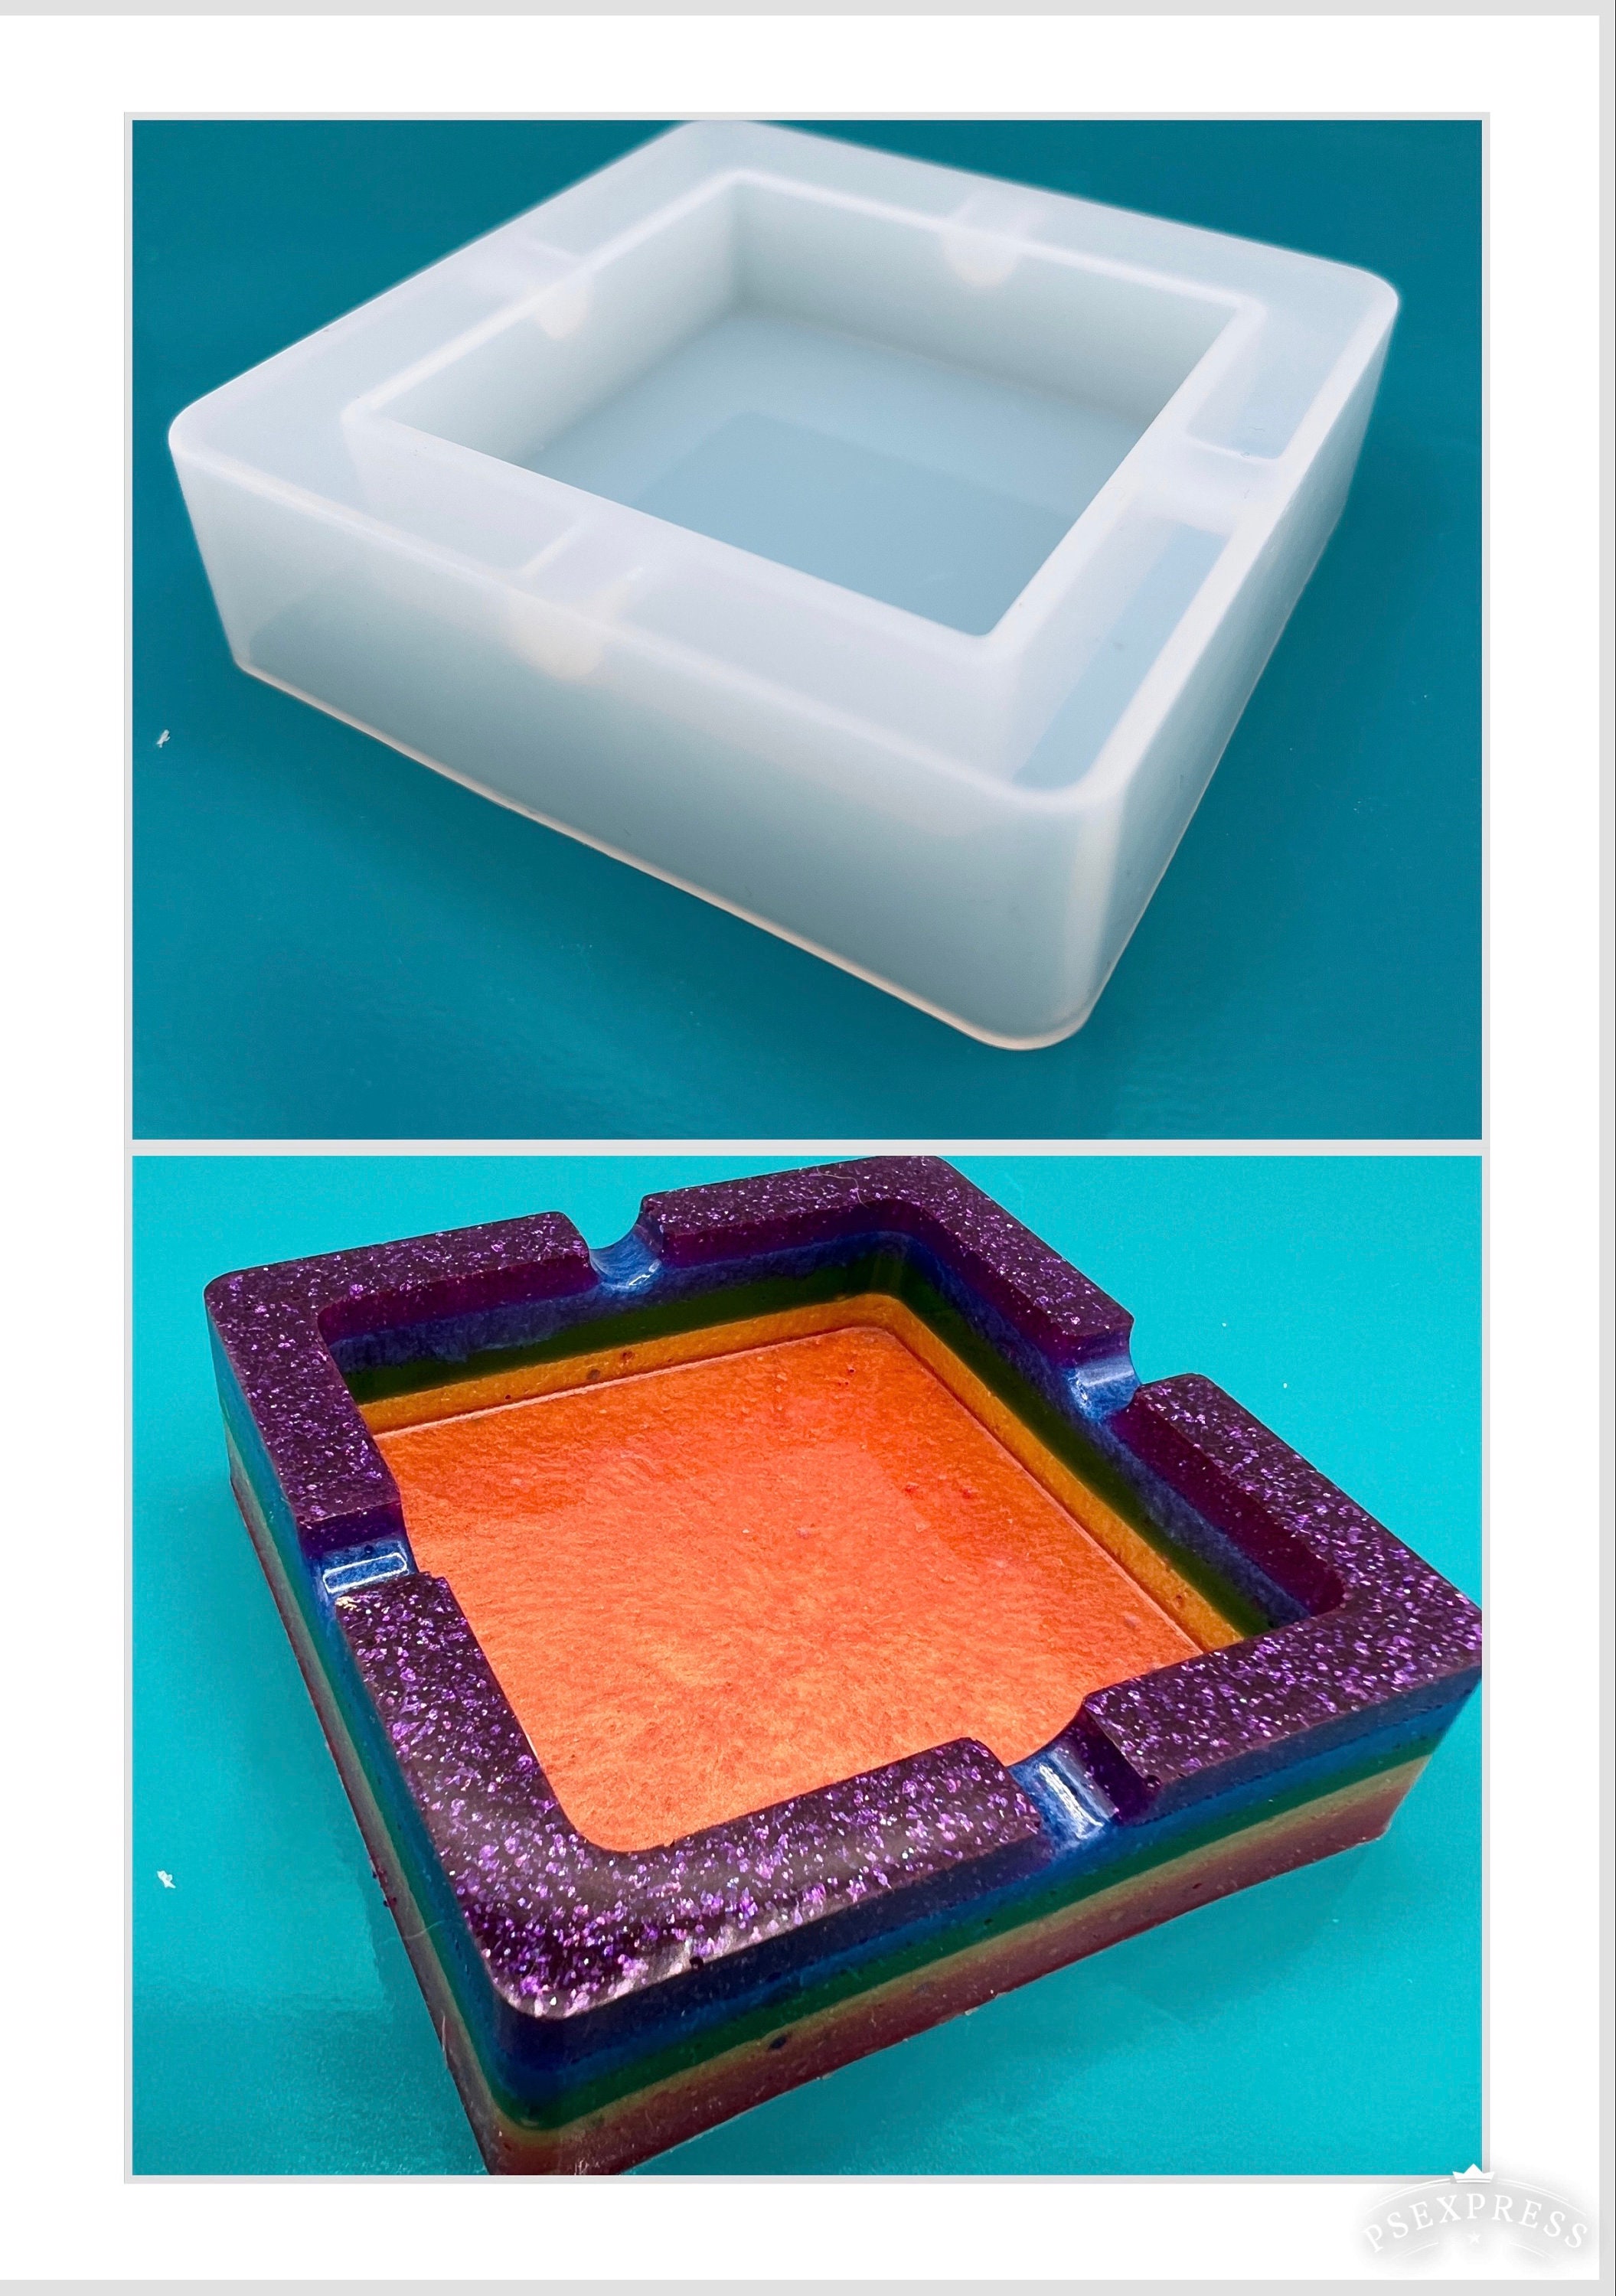 High Quality Ashtray Silicone Mold Epoxy Resin Round/square Ashtray Mold  for Gift Diy Craft Making Supplies Ashtray Crafts Production 